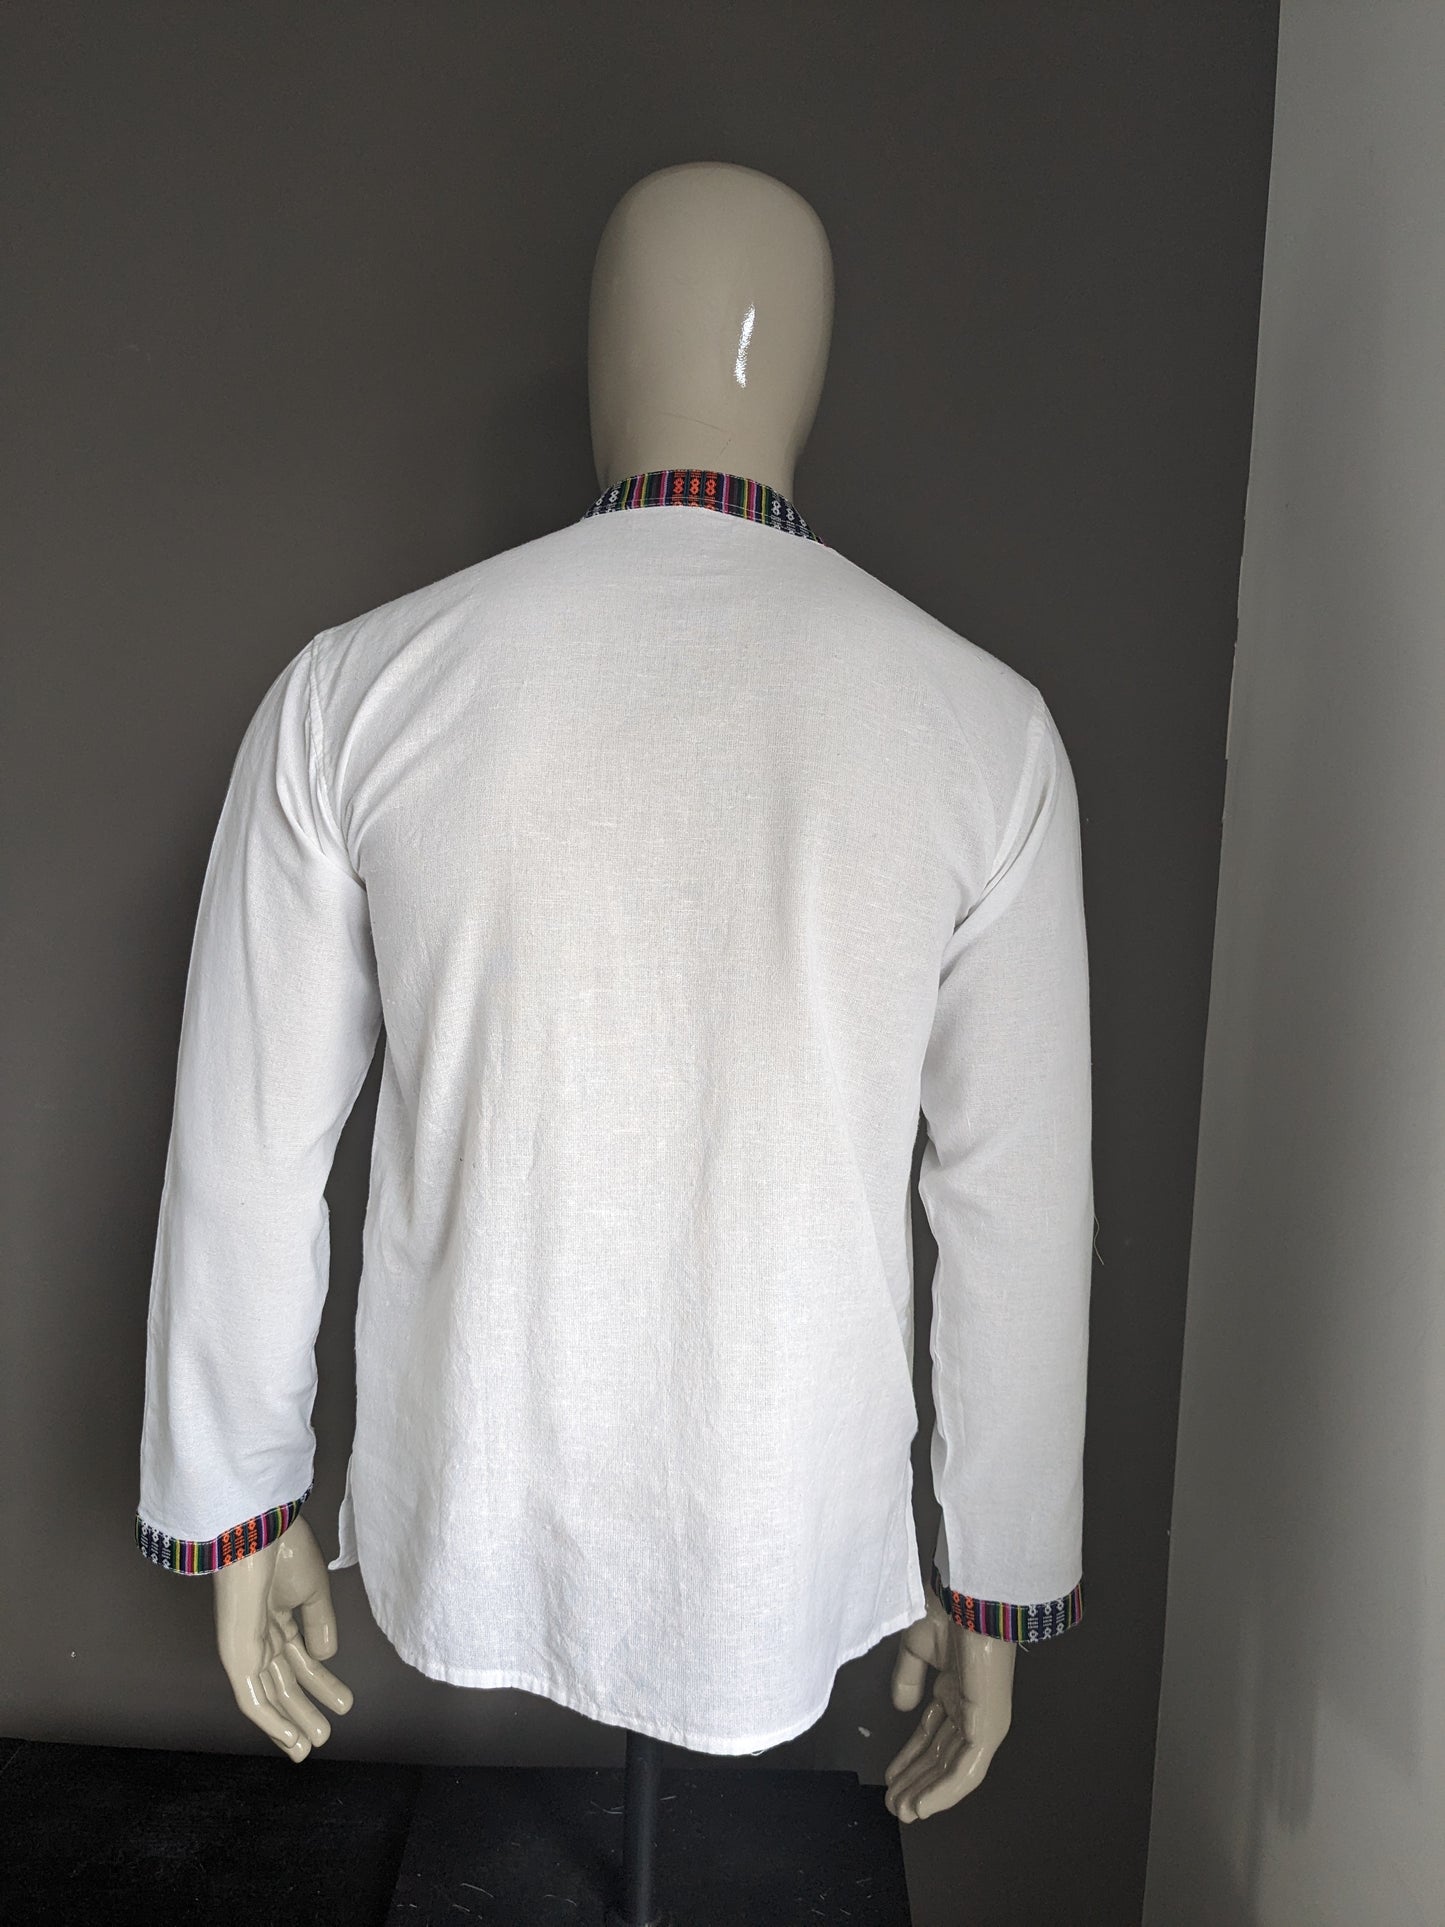 Vintage shirt shirt with Mao / Farmer / Standing Collar. White with colored edges. Size M.